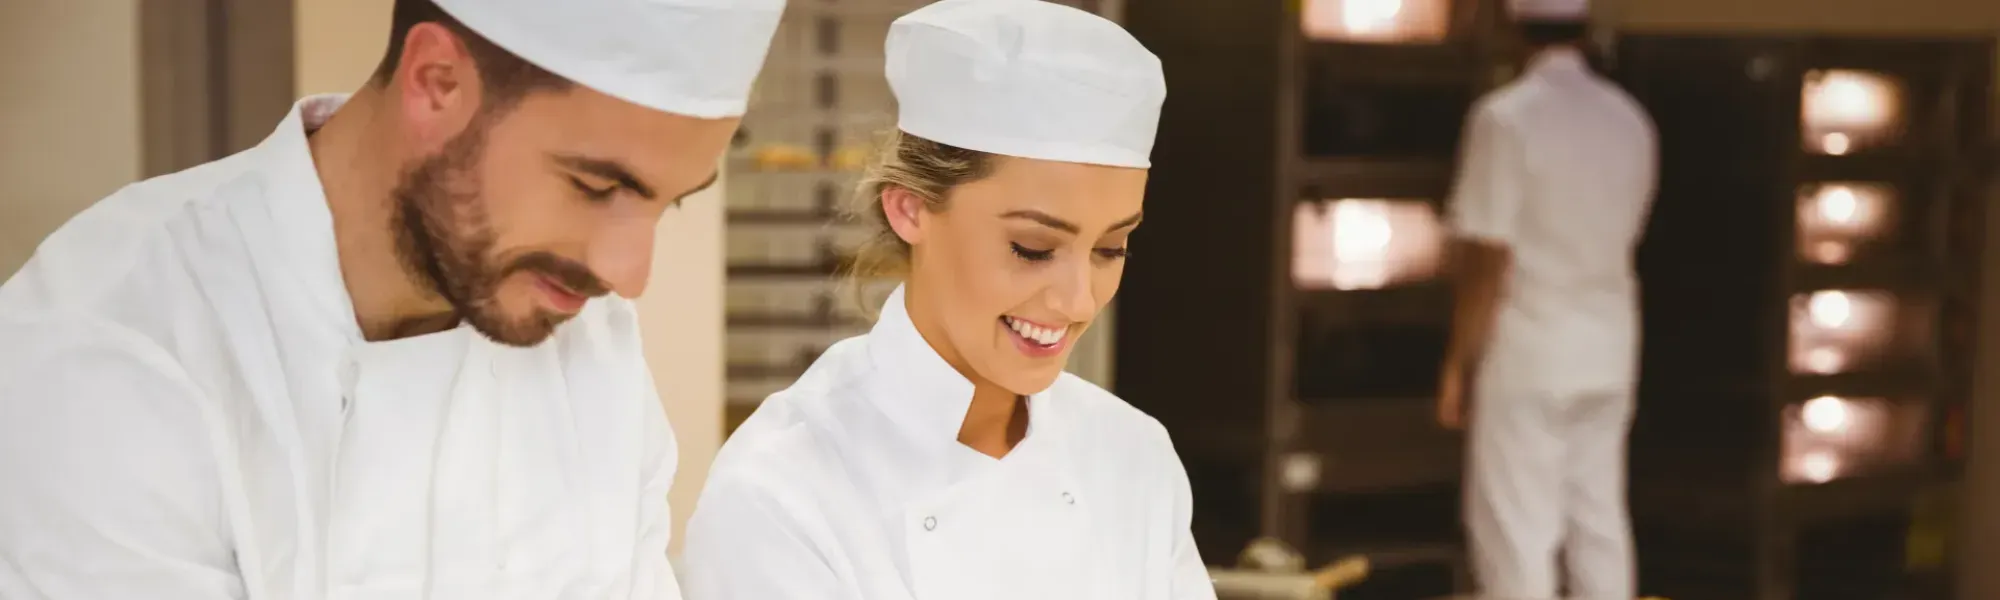 Cruise Galley Jobs - Galley Department - Faststream Recruitment